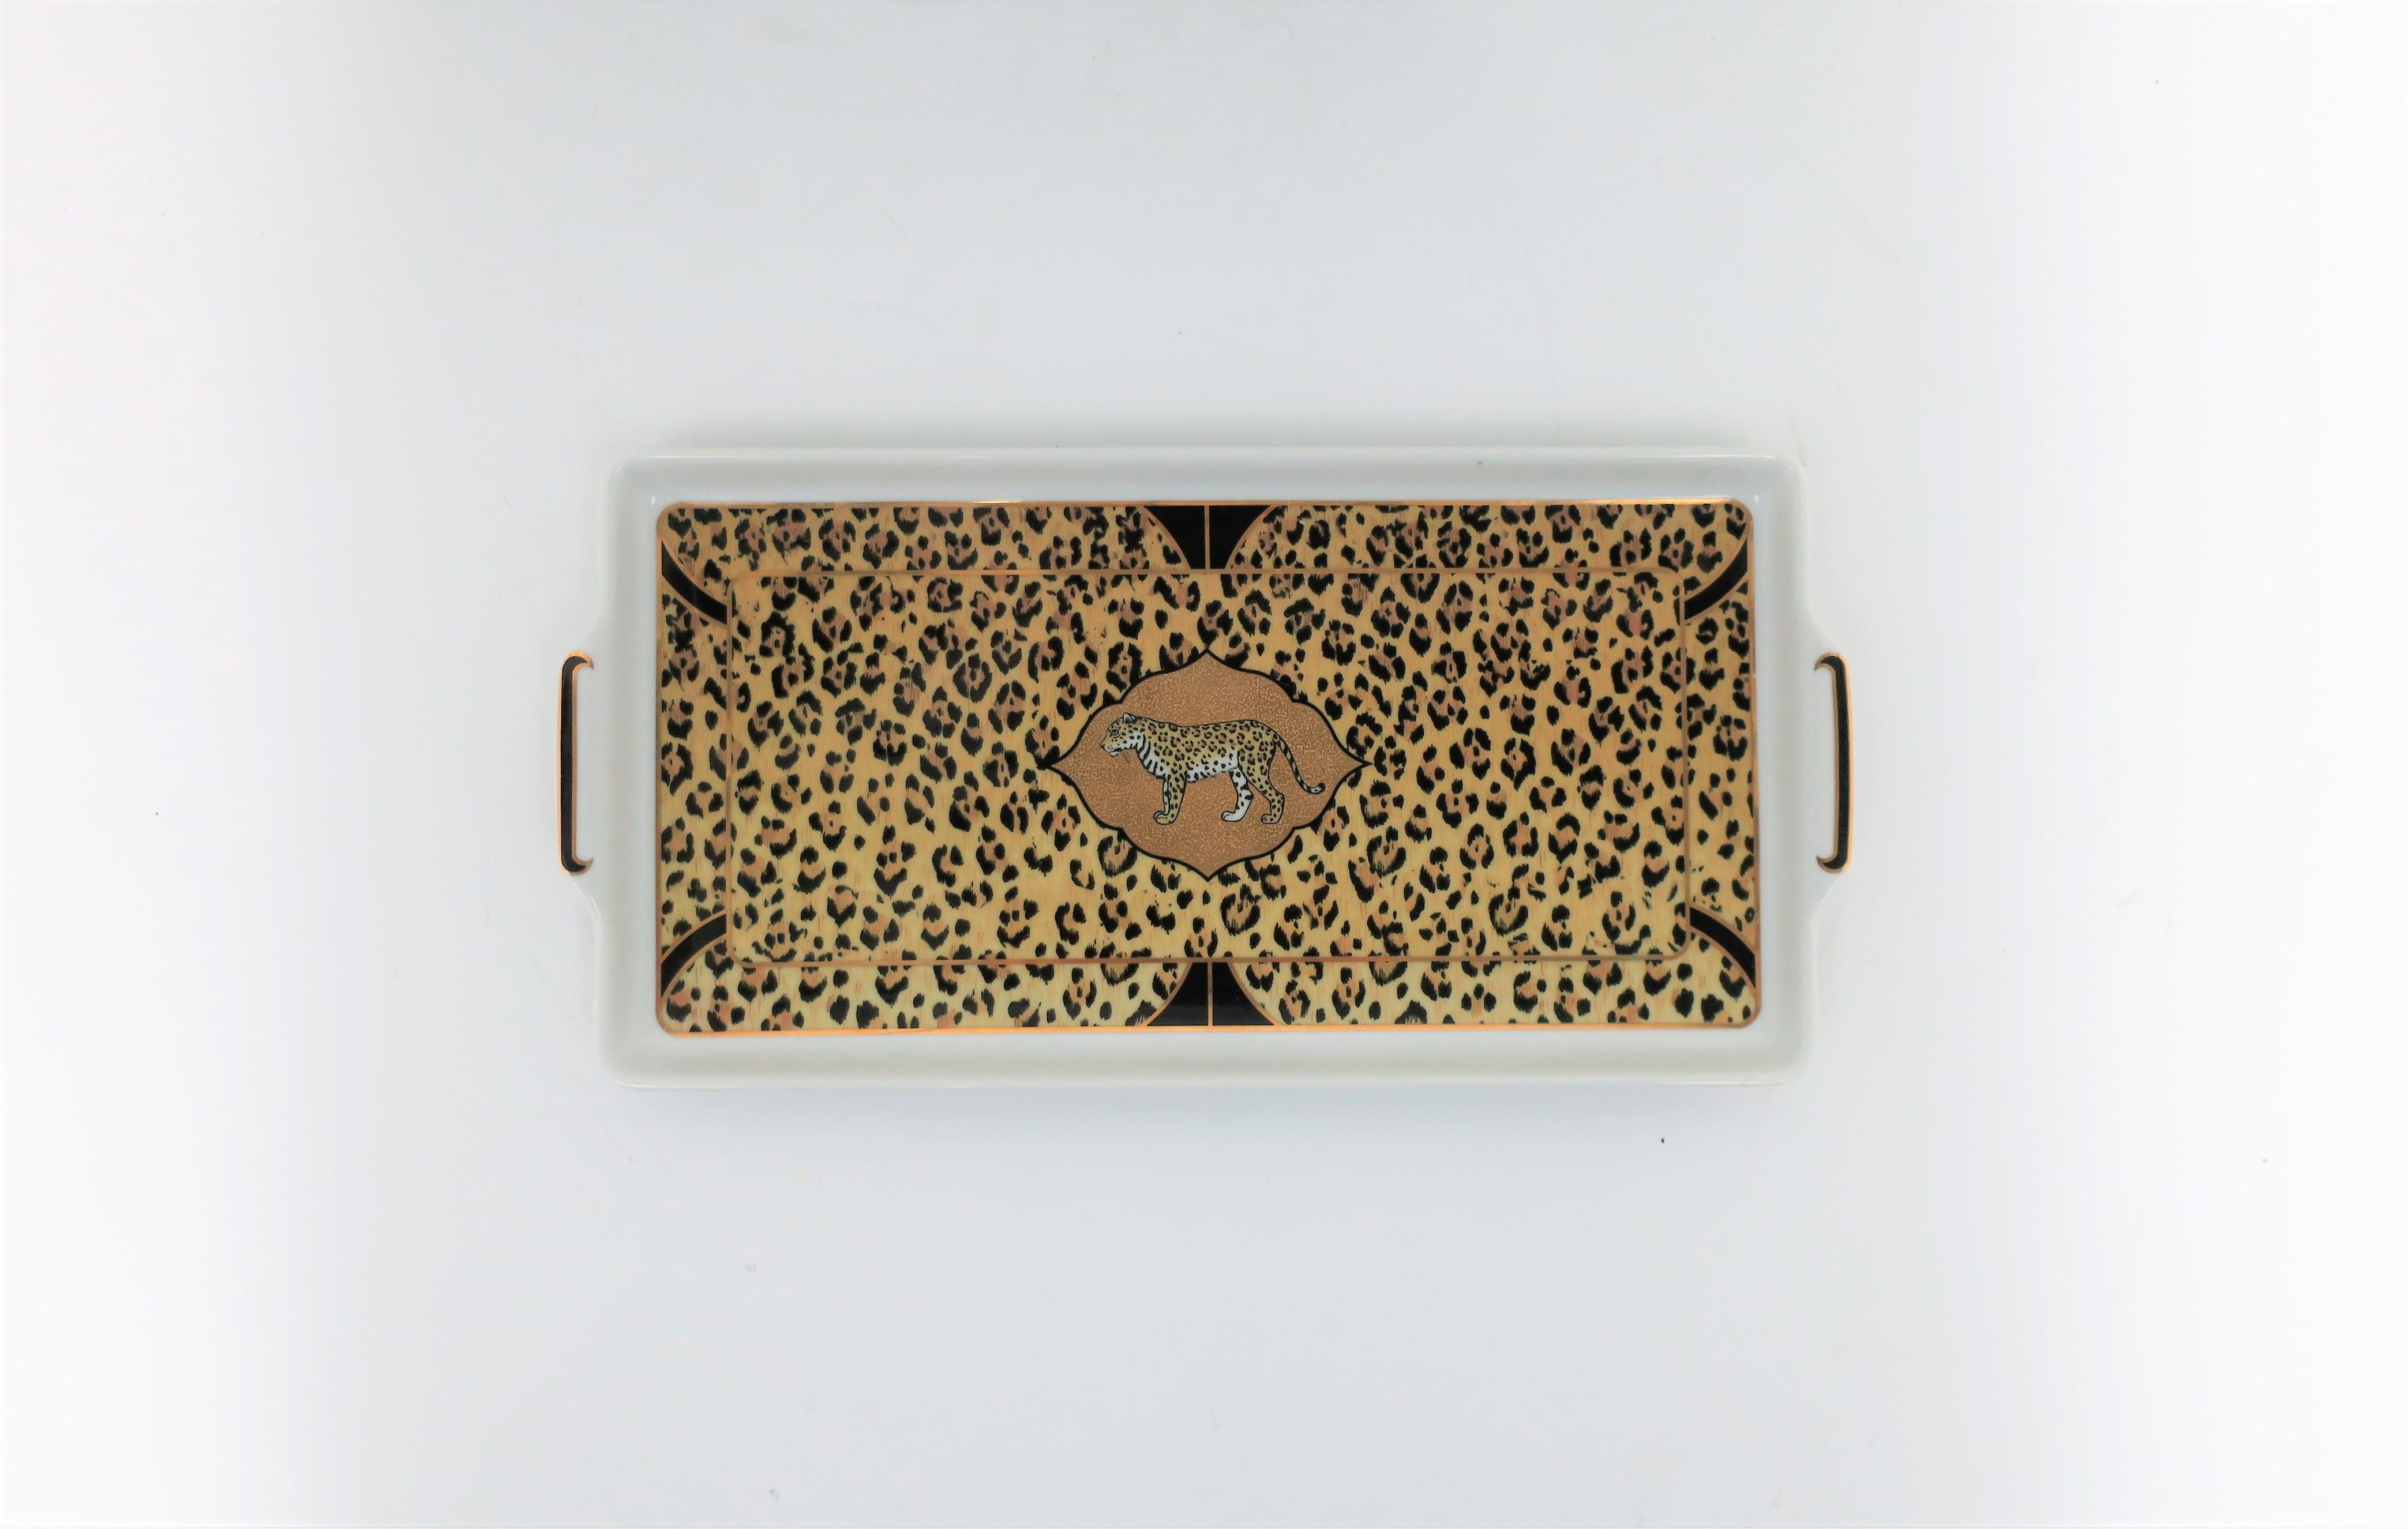 A beautiful '90s black and 24-karart gold designer Leopard tiger cat porcelain rectangular serving tray, by Lynn Chase, 1994, circa late-20th century. Tray can be used in many ways; I'm showing it here as a vanity tray with perfume and jewelry,